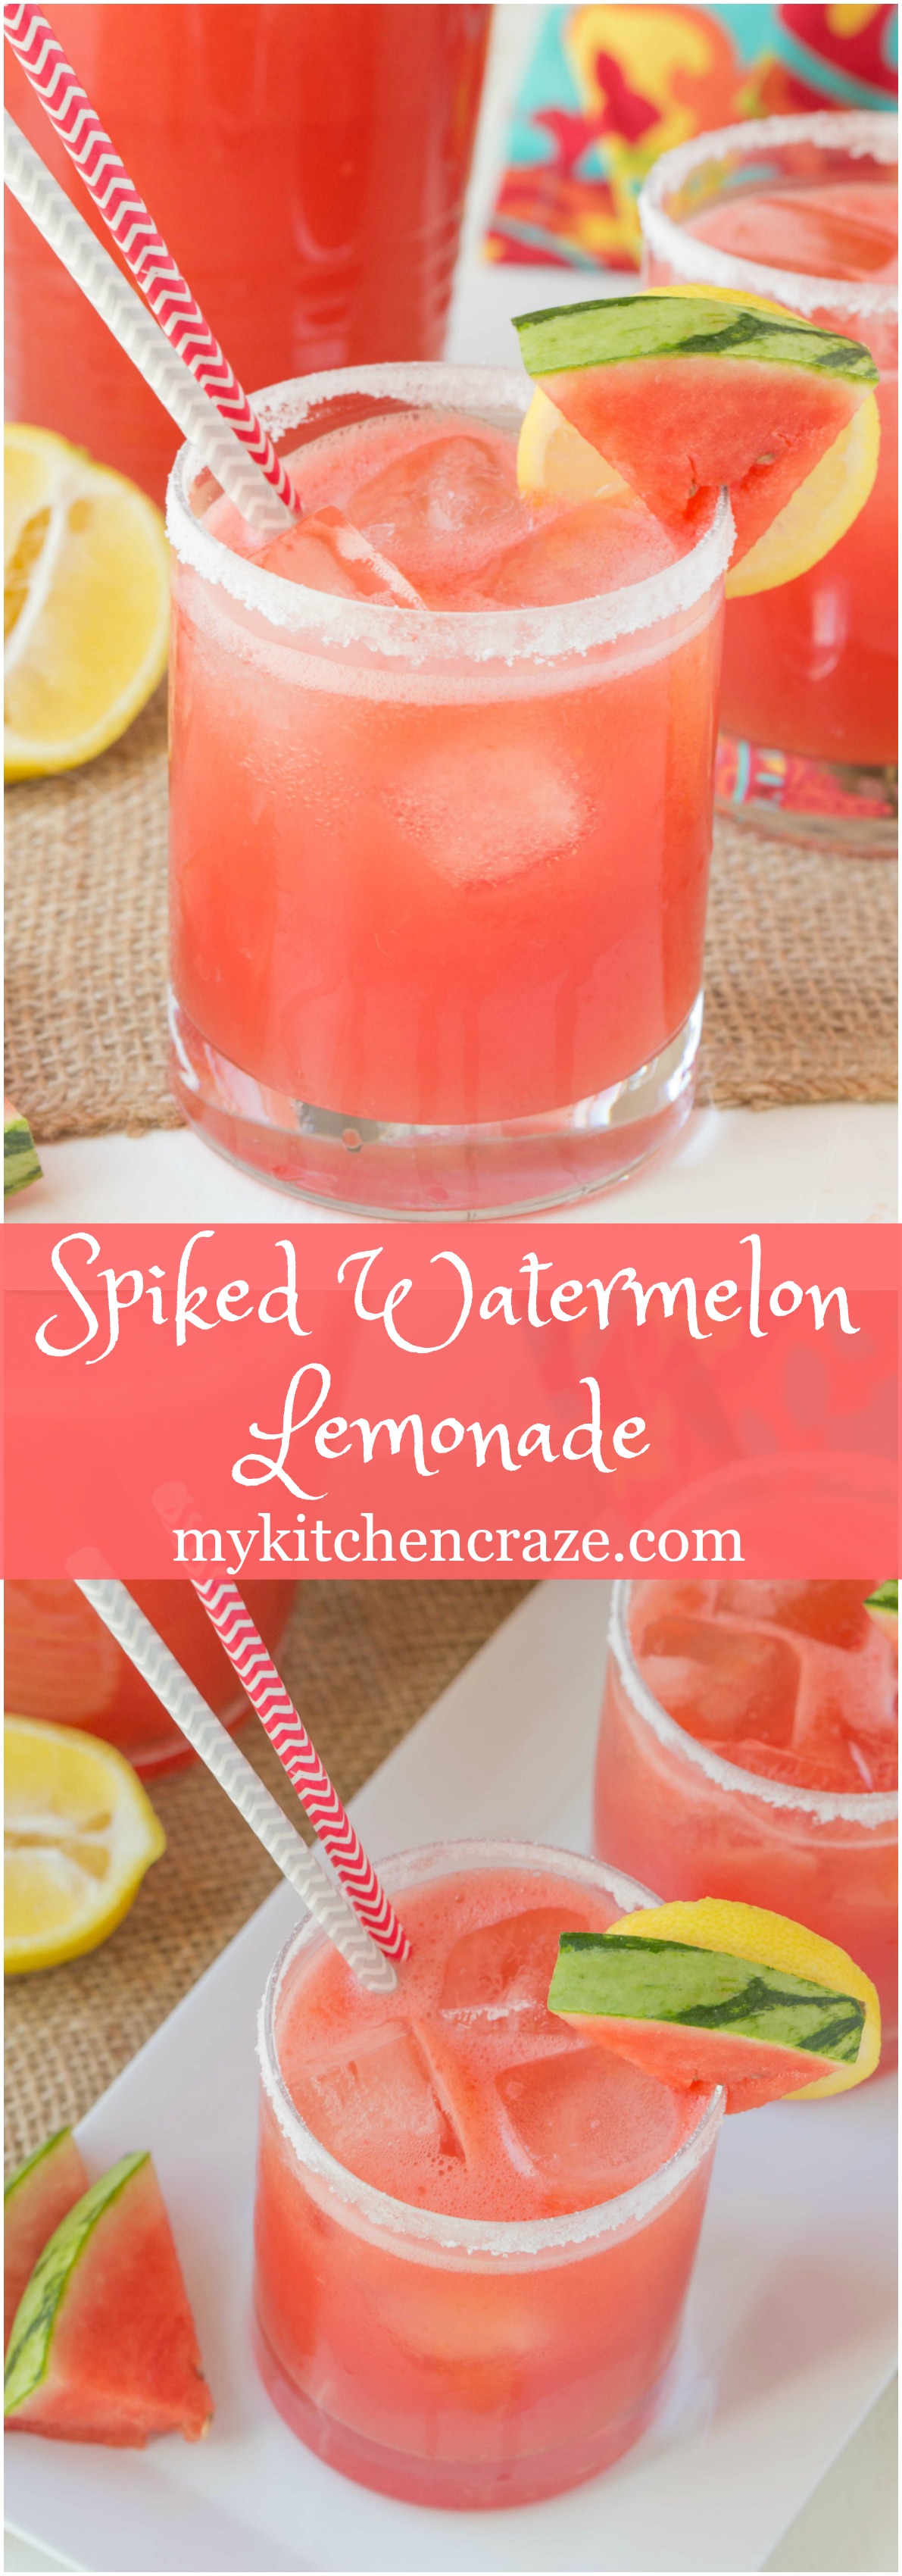 Spiked Watermelon Lemonade ~ mykitchencraze.com ~ This drink is a delicious blend of watermelon, frozen lemonade and vodka. This is one adult drink you won't want to pass up this summer!